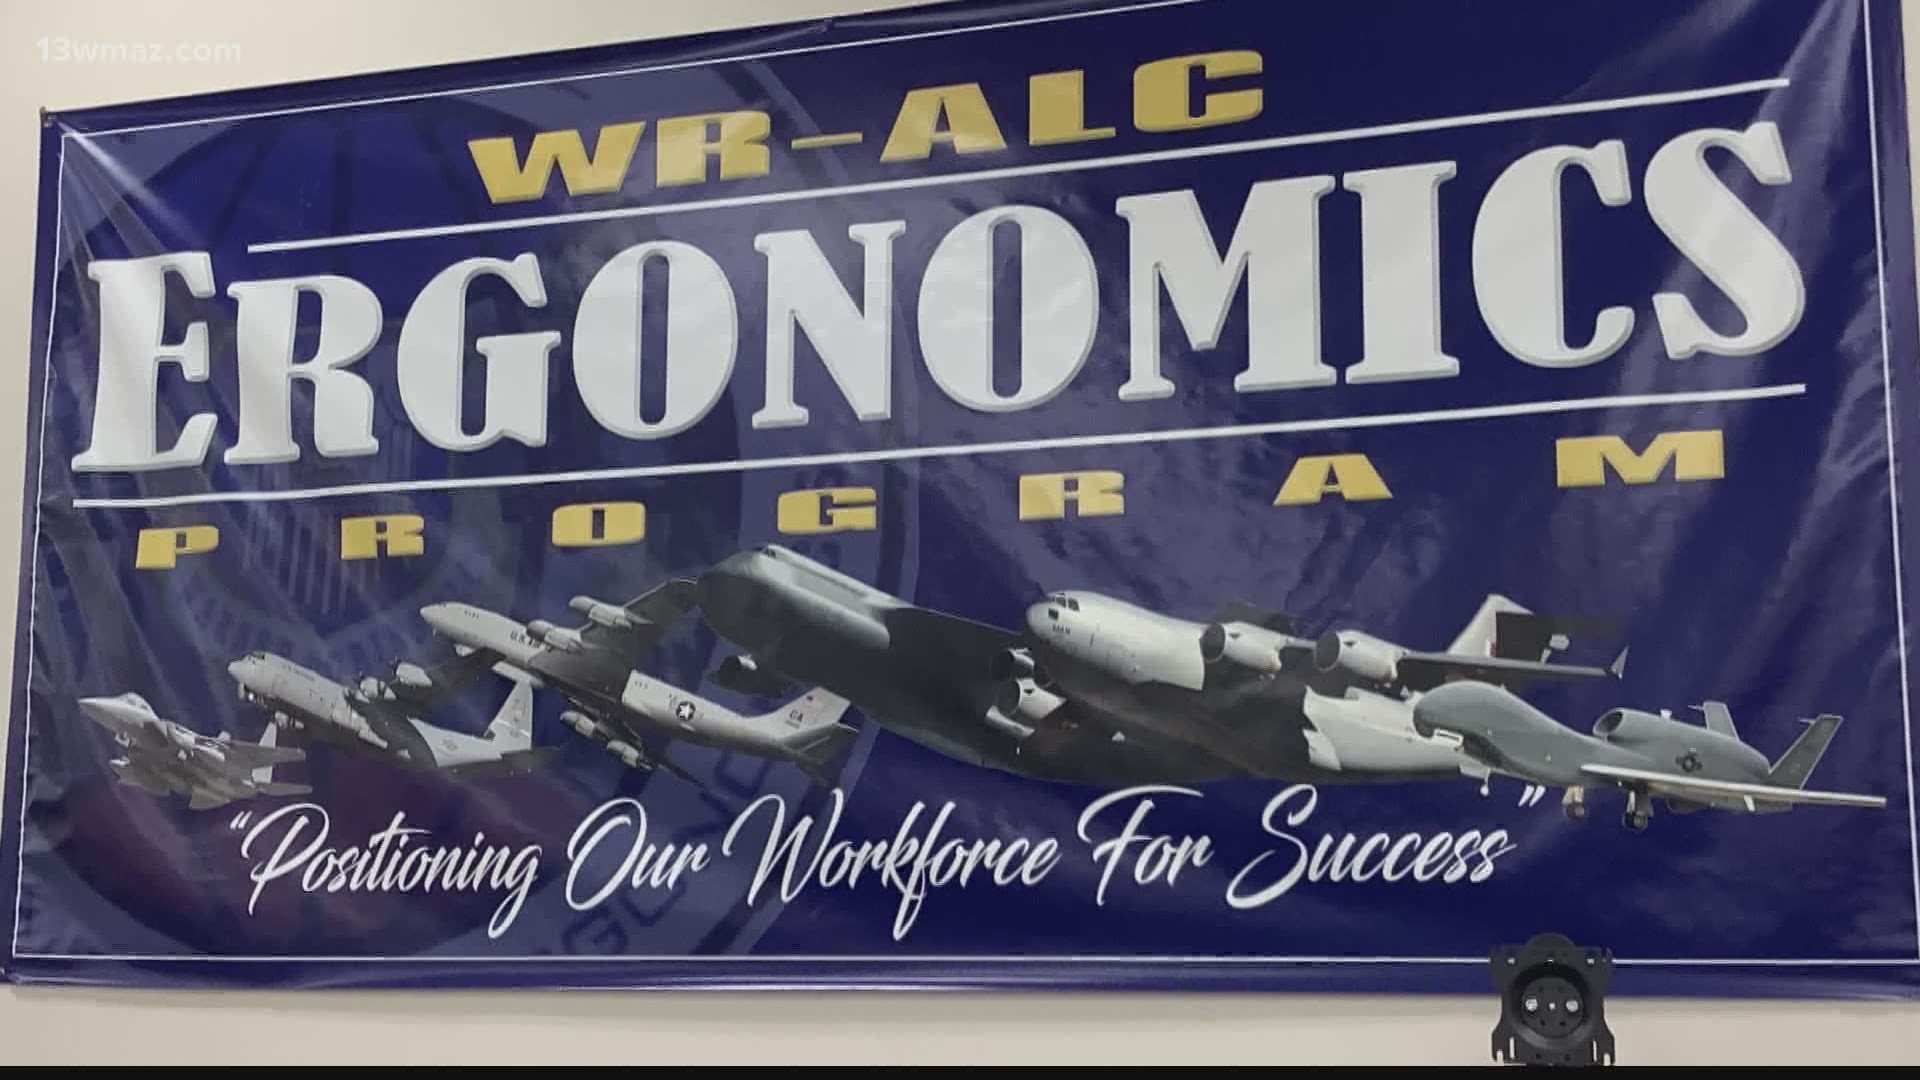 The Ergonomics team at Robins Air Force Base says they 'posture' the warfighter for success.